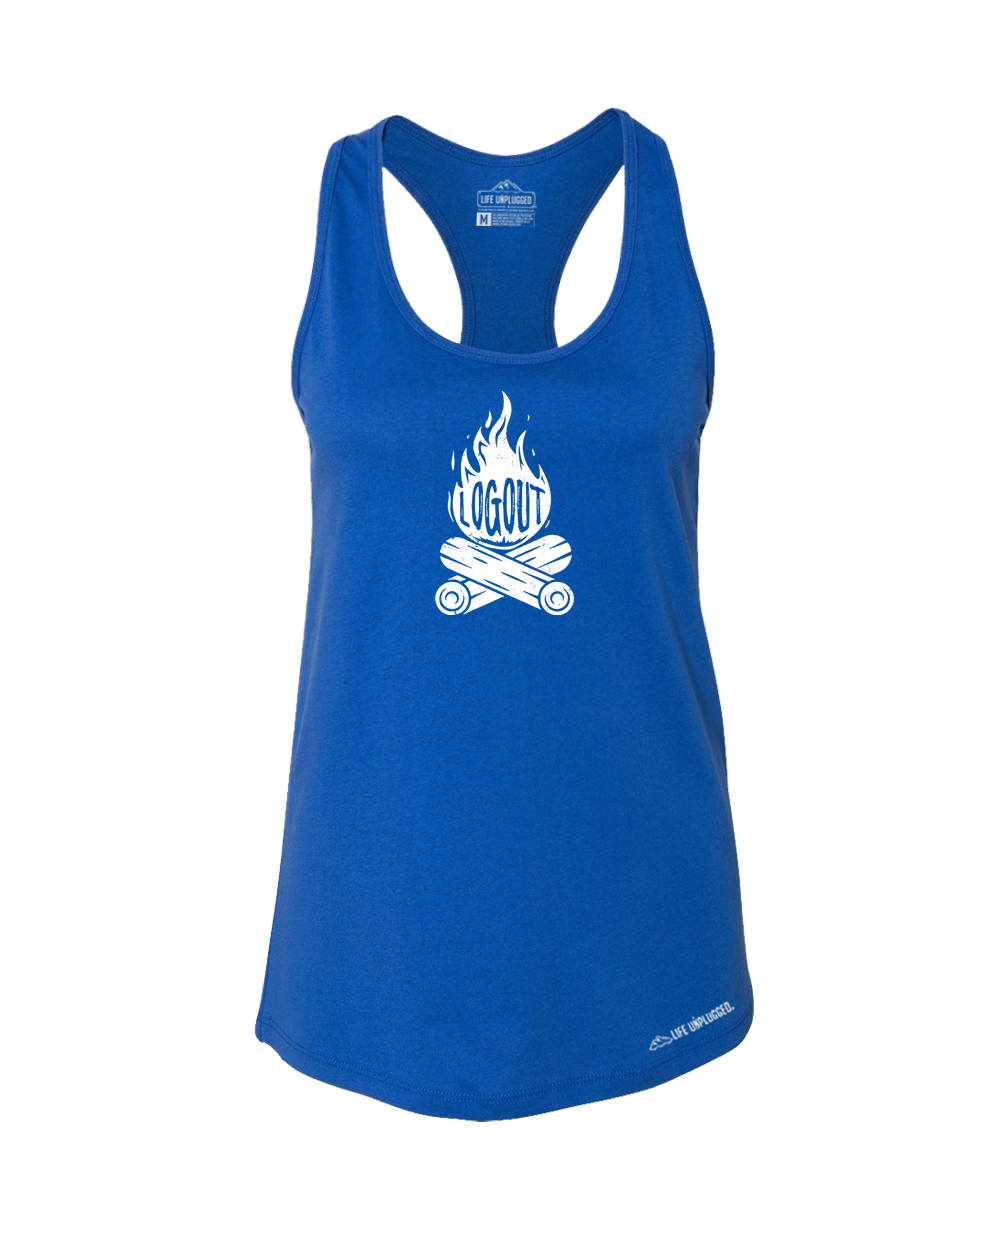 Log Out Campfire Premium Women's Relaxed Fit Racerback Tank Top - Life Unplugged